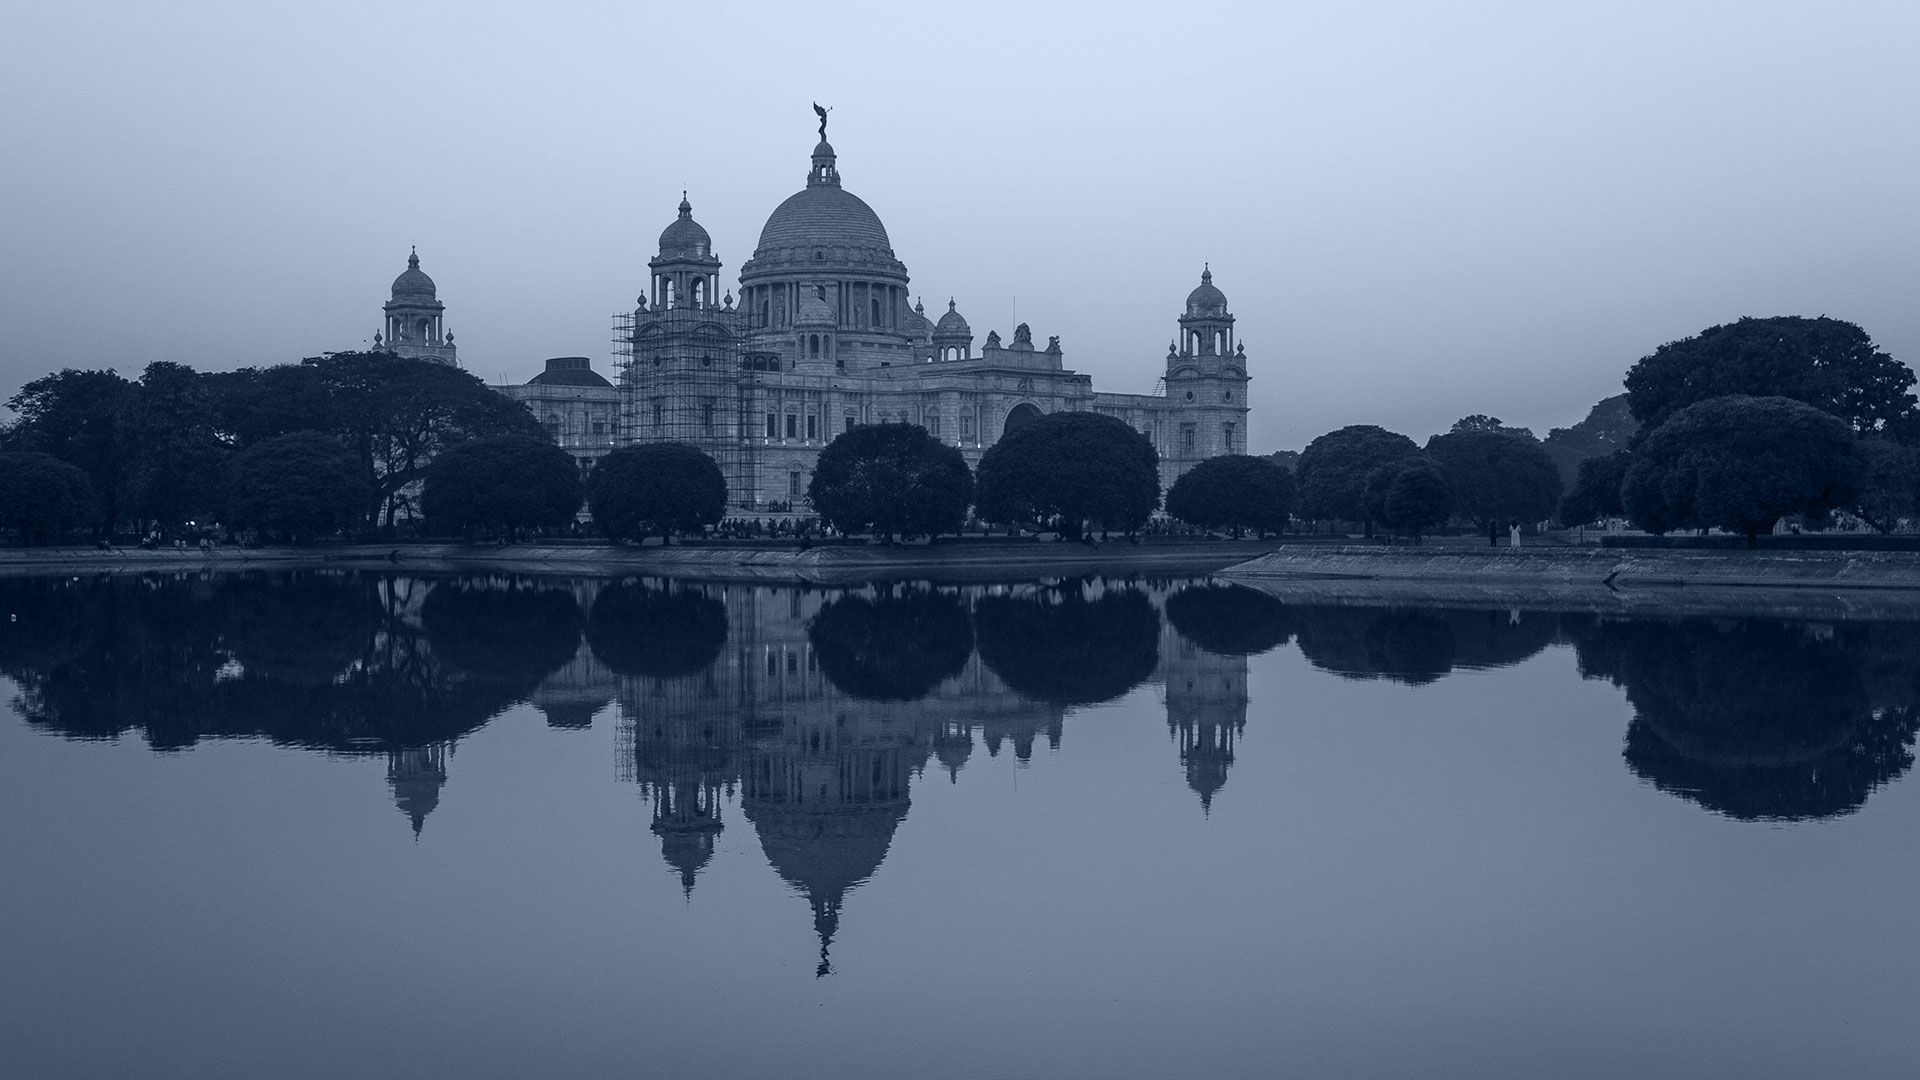 Indian architecture beside the water.